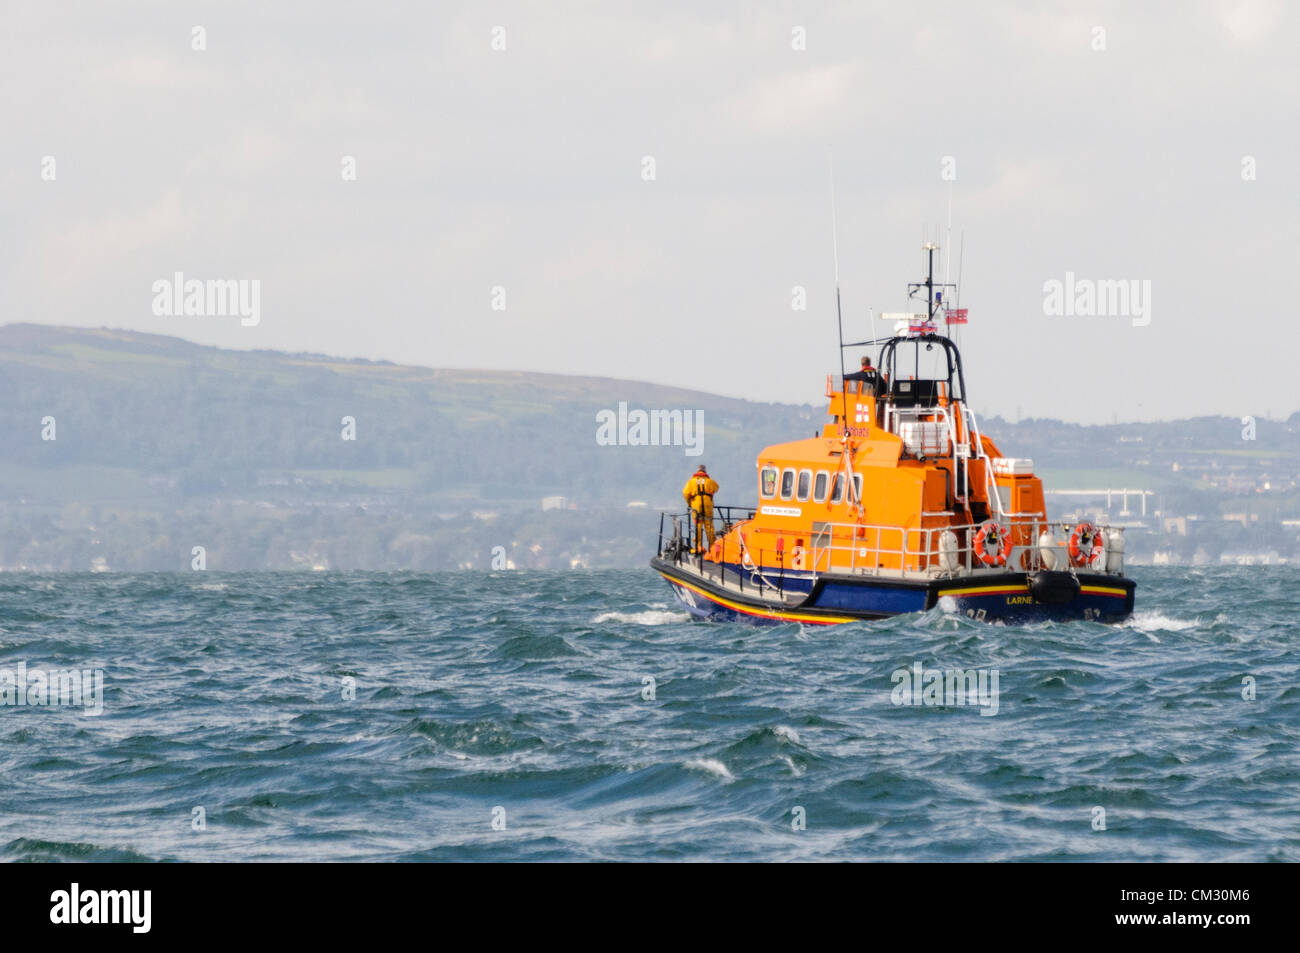 Bangor, County Down. 23/09/2012 - Donaghadee RNLI lifeboat crew scan the sea for survivors and bodies.  Emergency Services hold 'Operation Diamond', a joint training exercise off the coast of North Down. Stock Photo